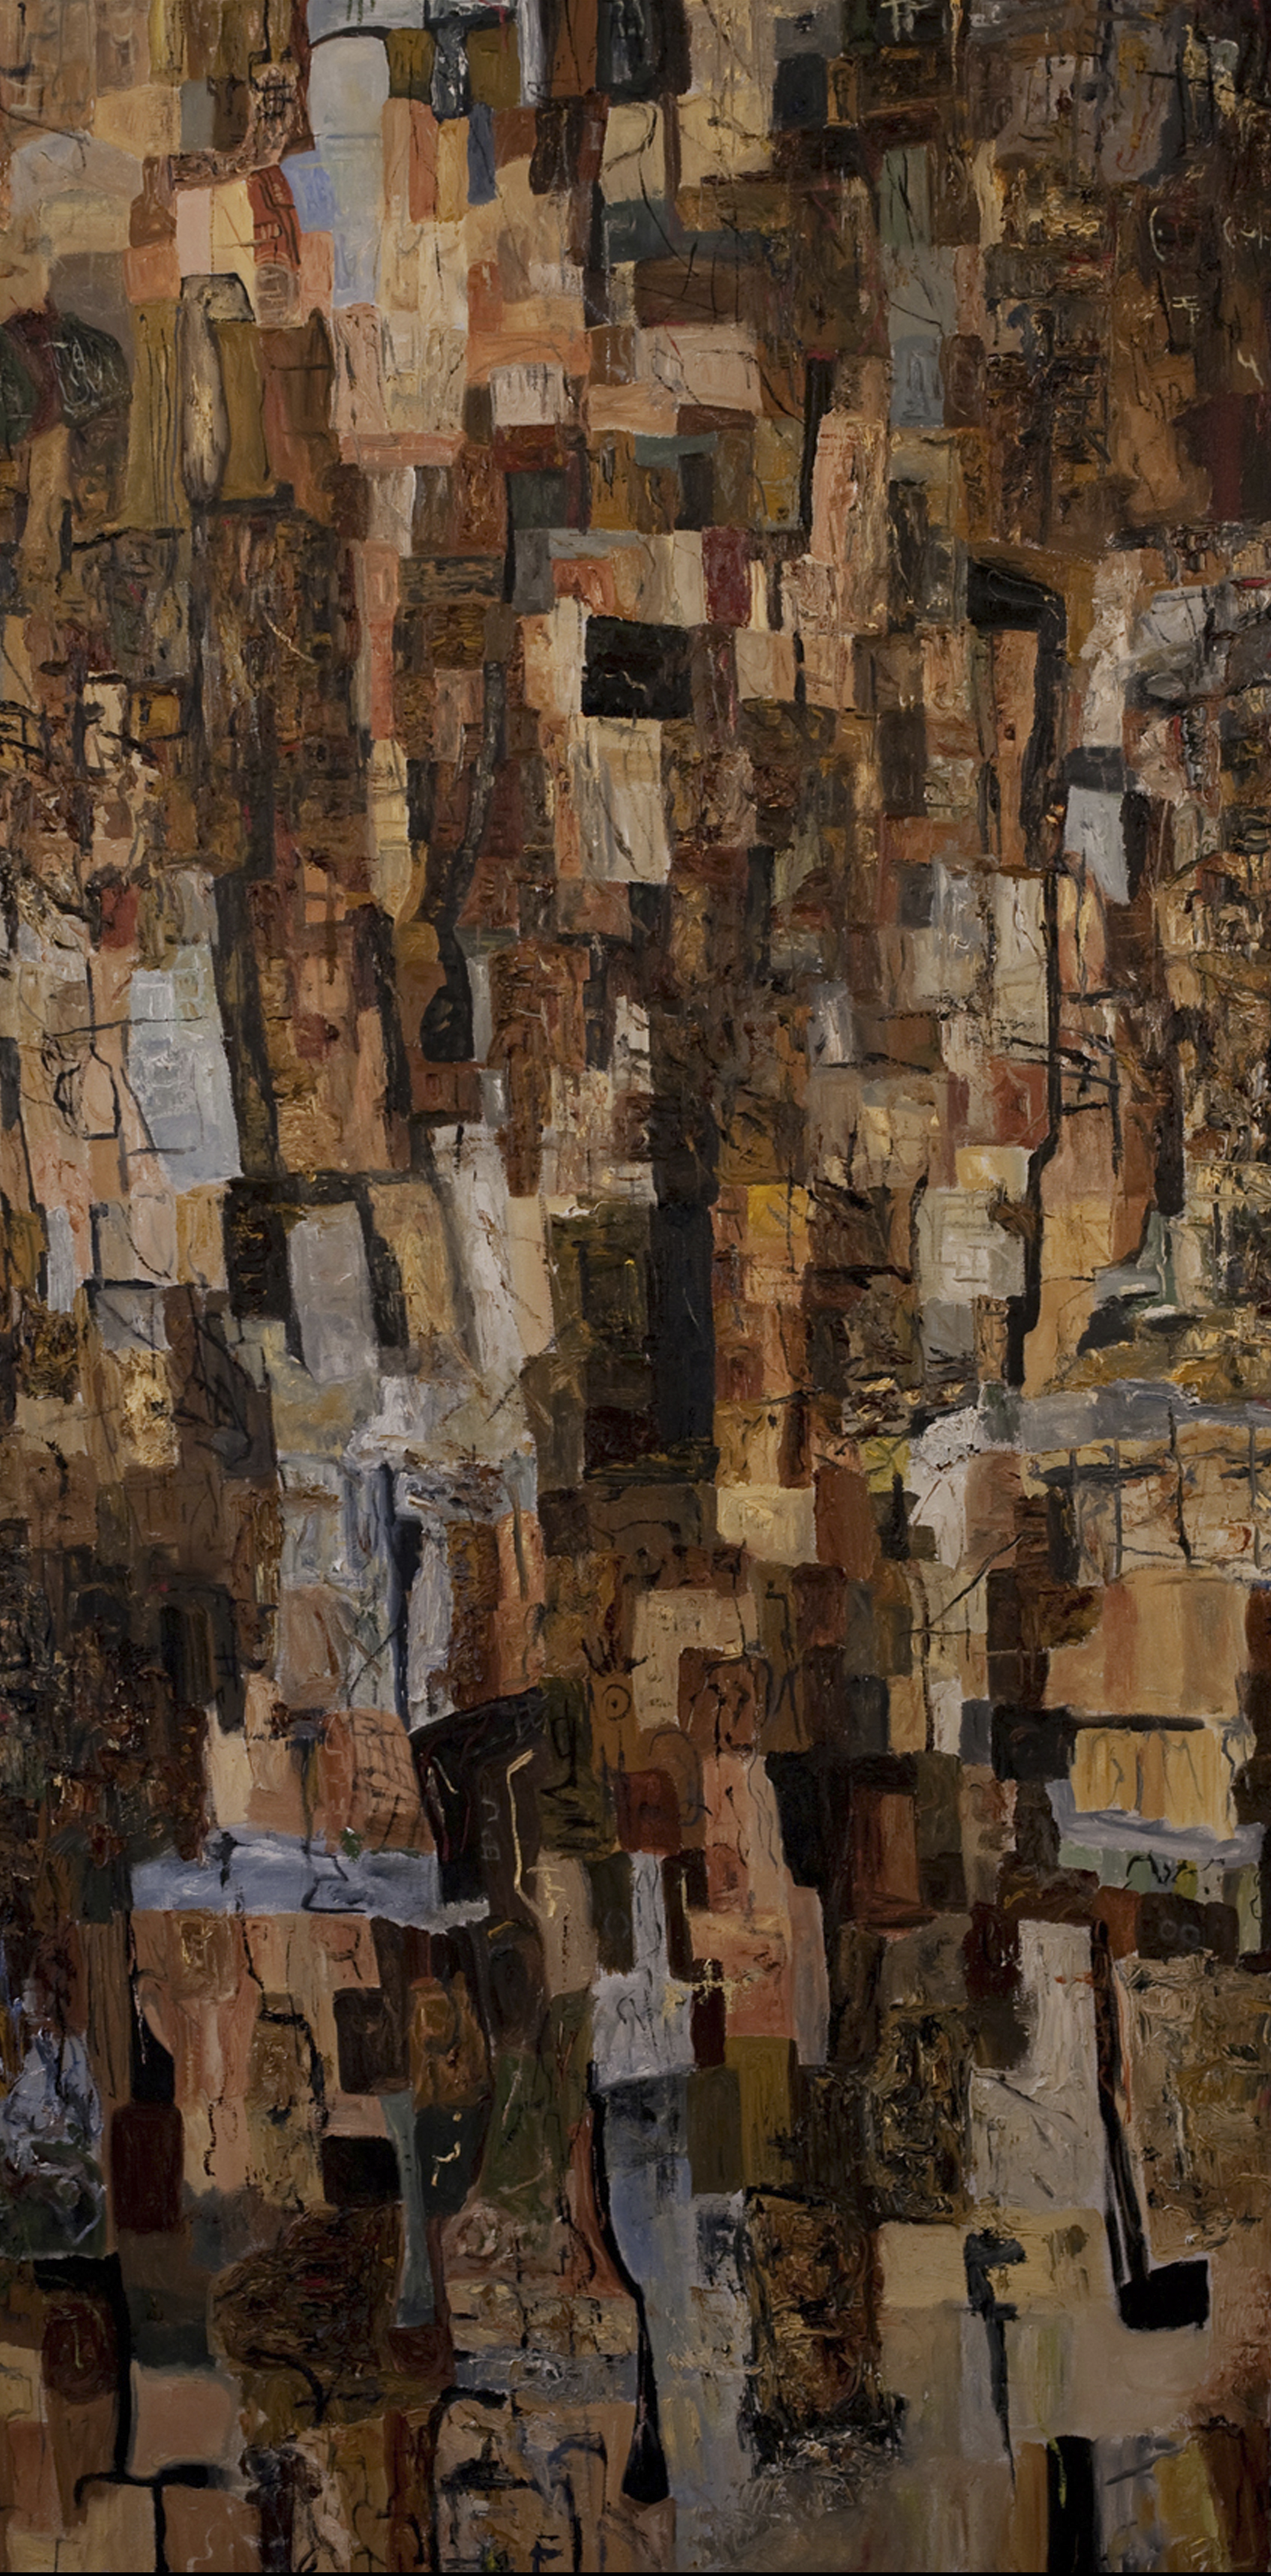 "Structure of Earth" # 31, oil on canvas, 77" x 39"